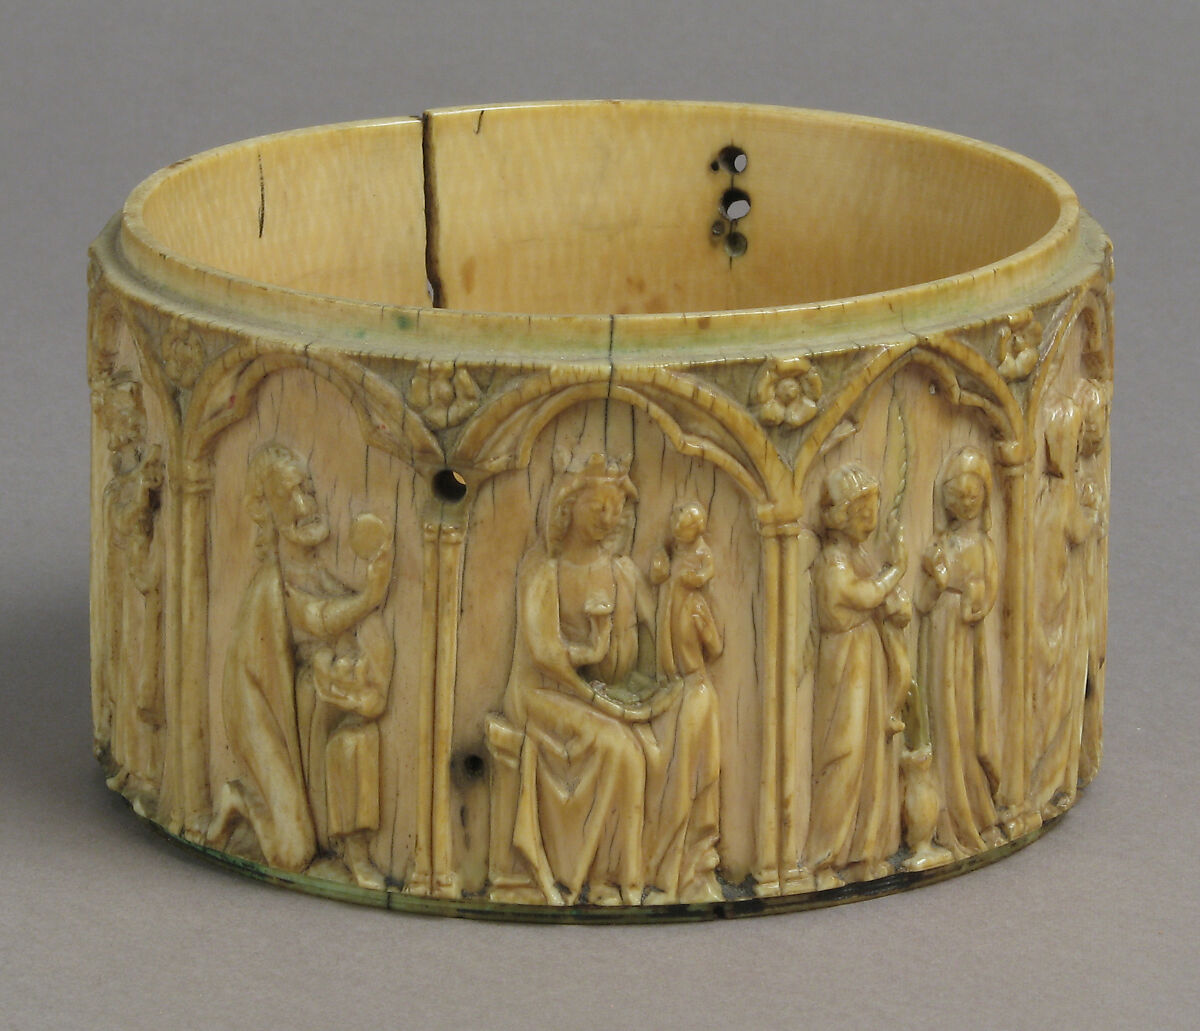 Circular Box (Pyxis) with Scenes from the Infancy of Jesus, Elephant ivory with traces of polychromy, French 